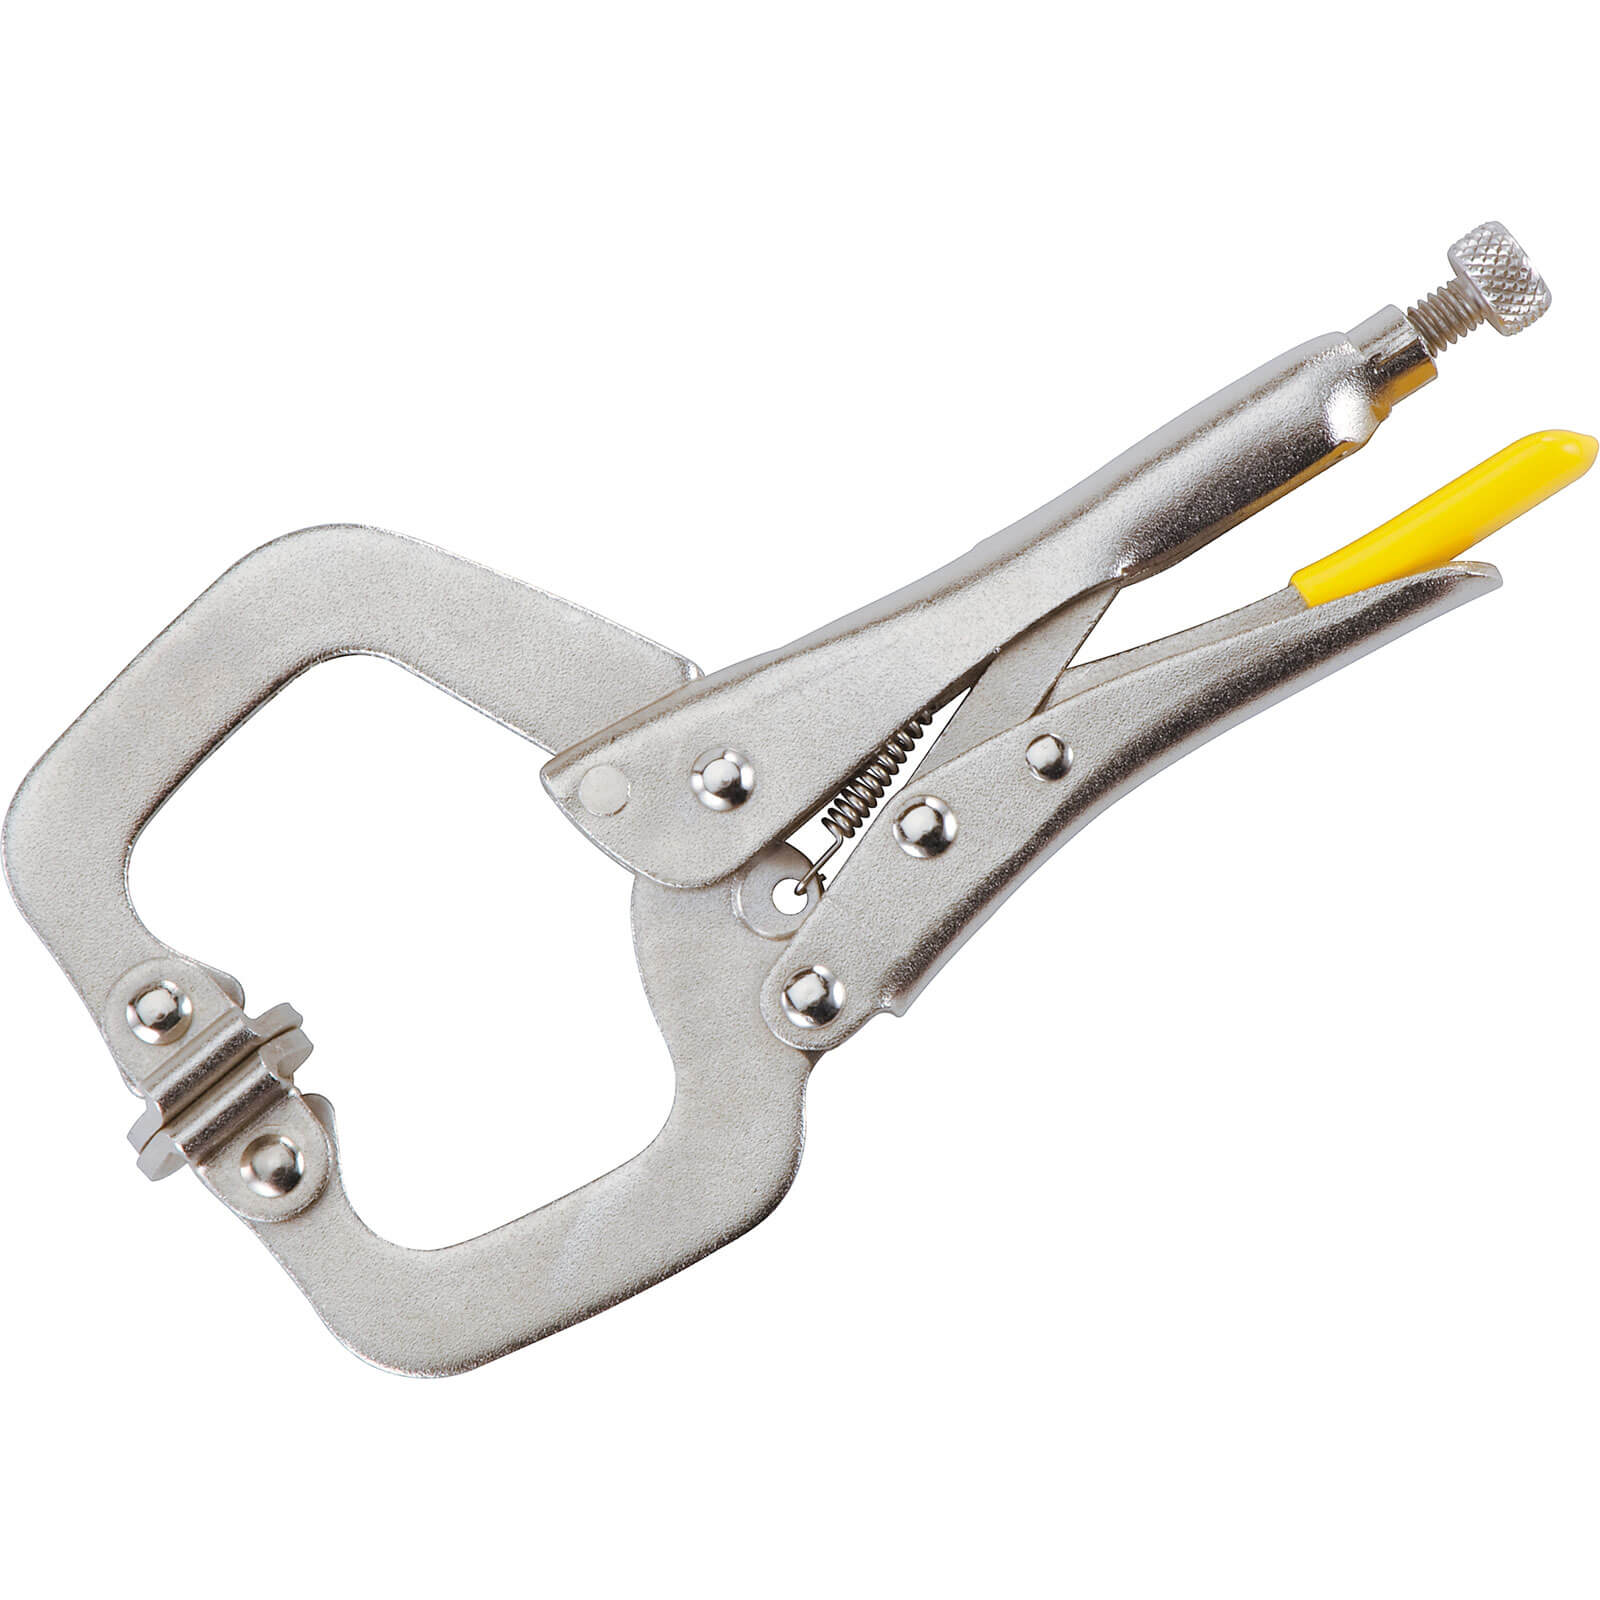 Photo of Stanley Locking C Clamp Pliers 76mm